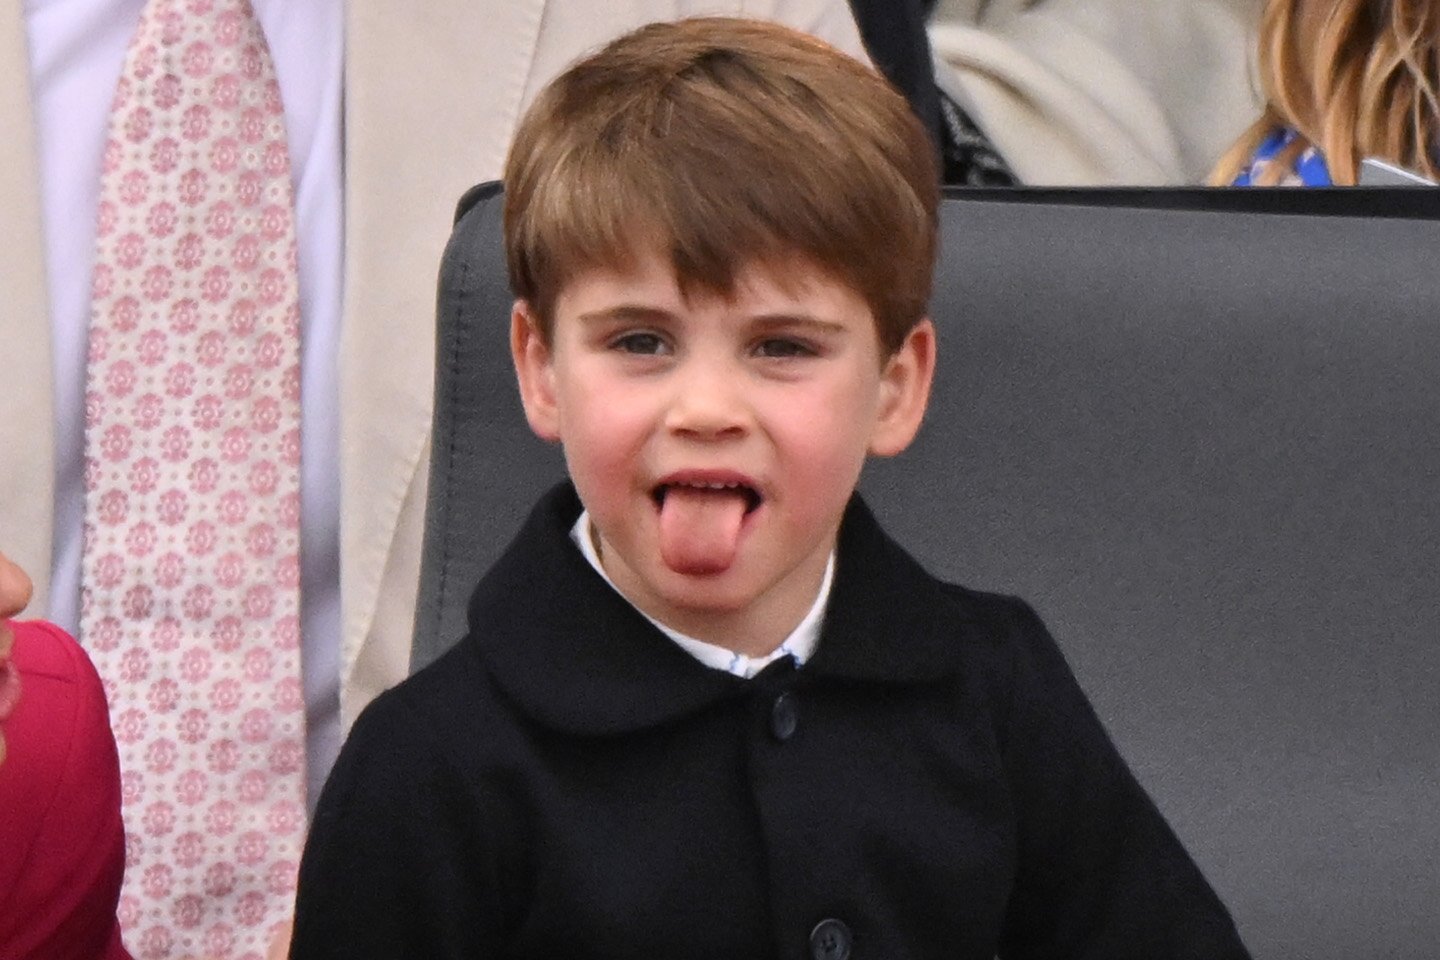 <p>Prince Louis's antics continued! He stuck out his tongue while watching the Platinum Jubilee Pageant in London, the final event celebrating Queen Elizabeth II's <a href="https://www.wonderwall.com/celebrity/royals/platinum-jubilee-see-the-best-photos-from-4-days-of-celebrations-marking-the-queens-70-year-reign-606239.gallery">Platinum Jubilee marking 70 years on the throne</a>, on June 5, 2022.</p>